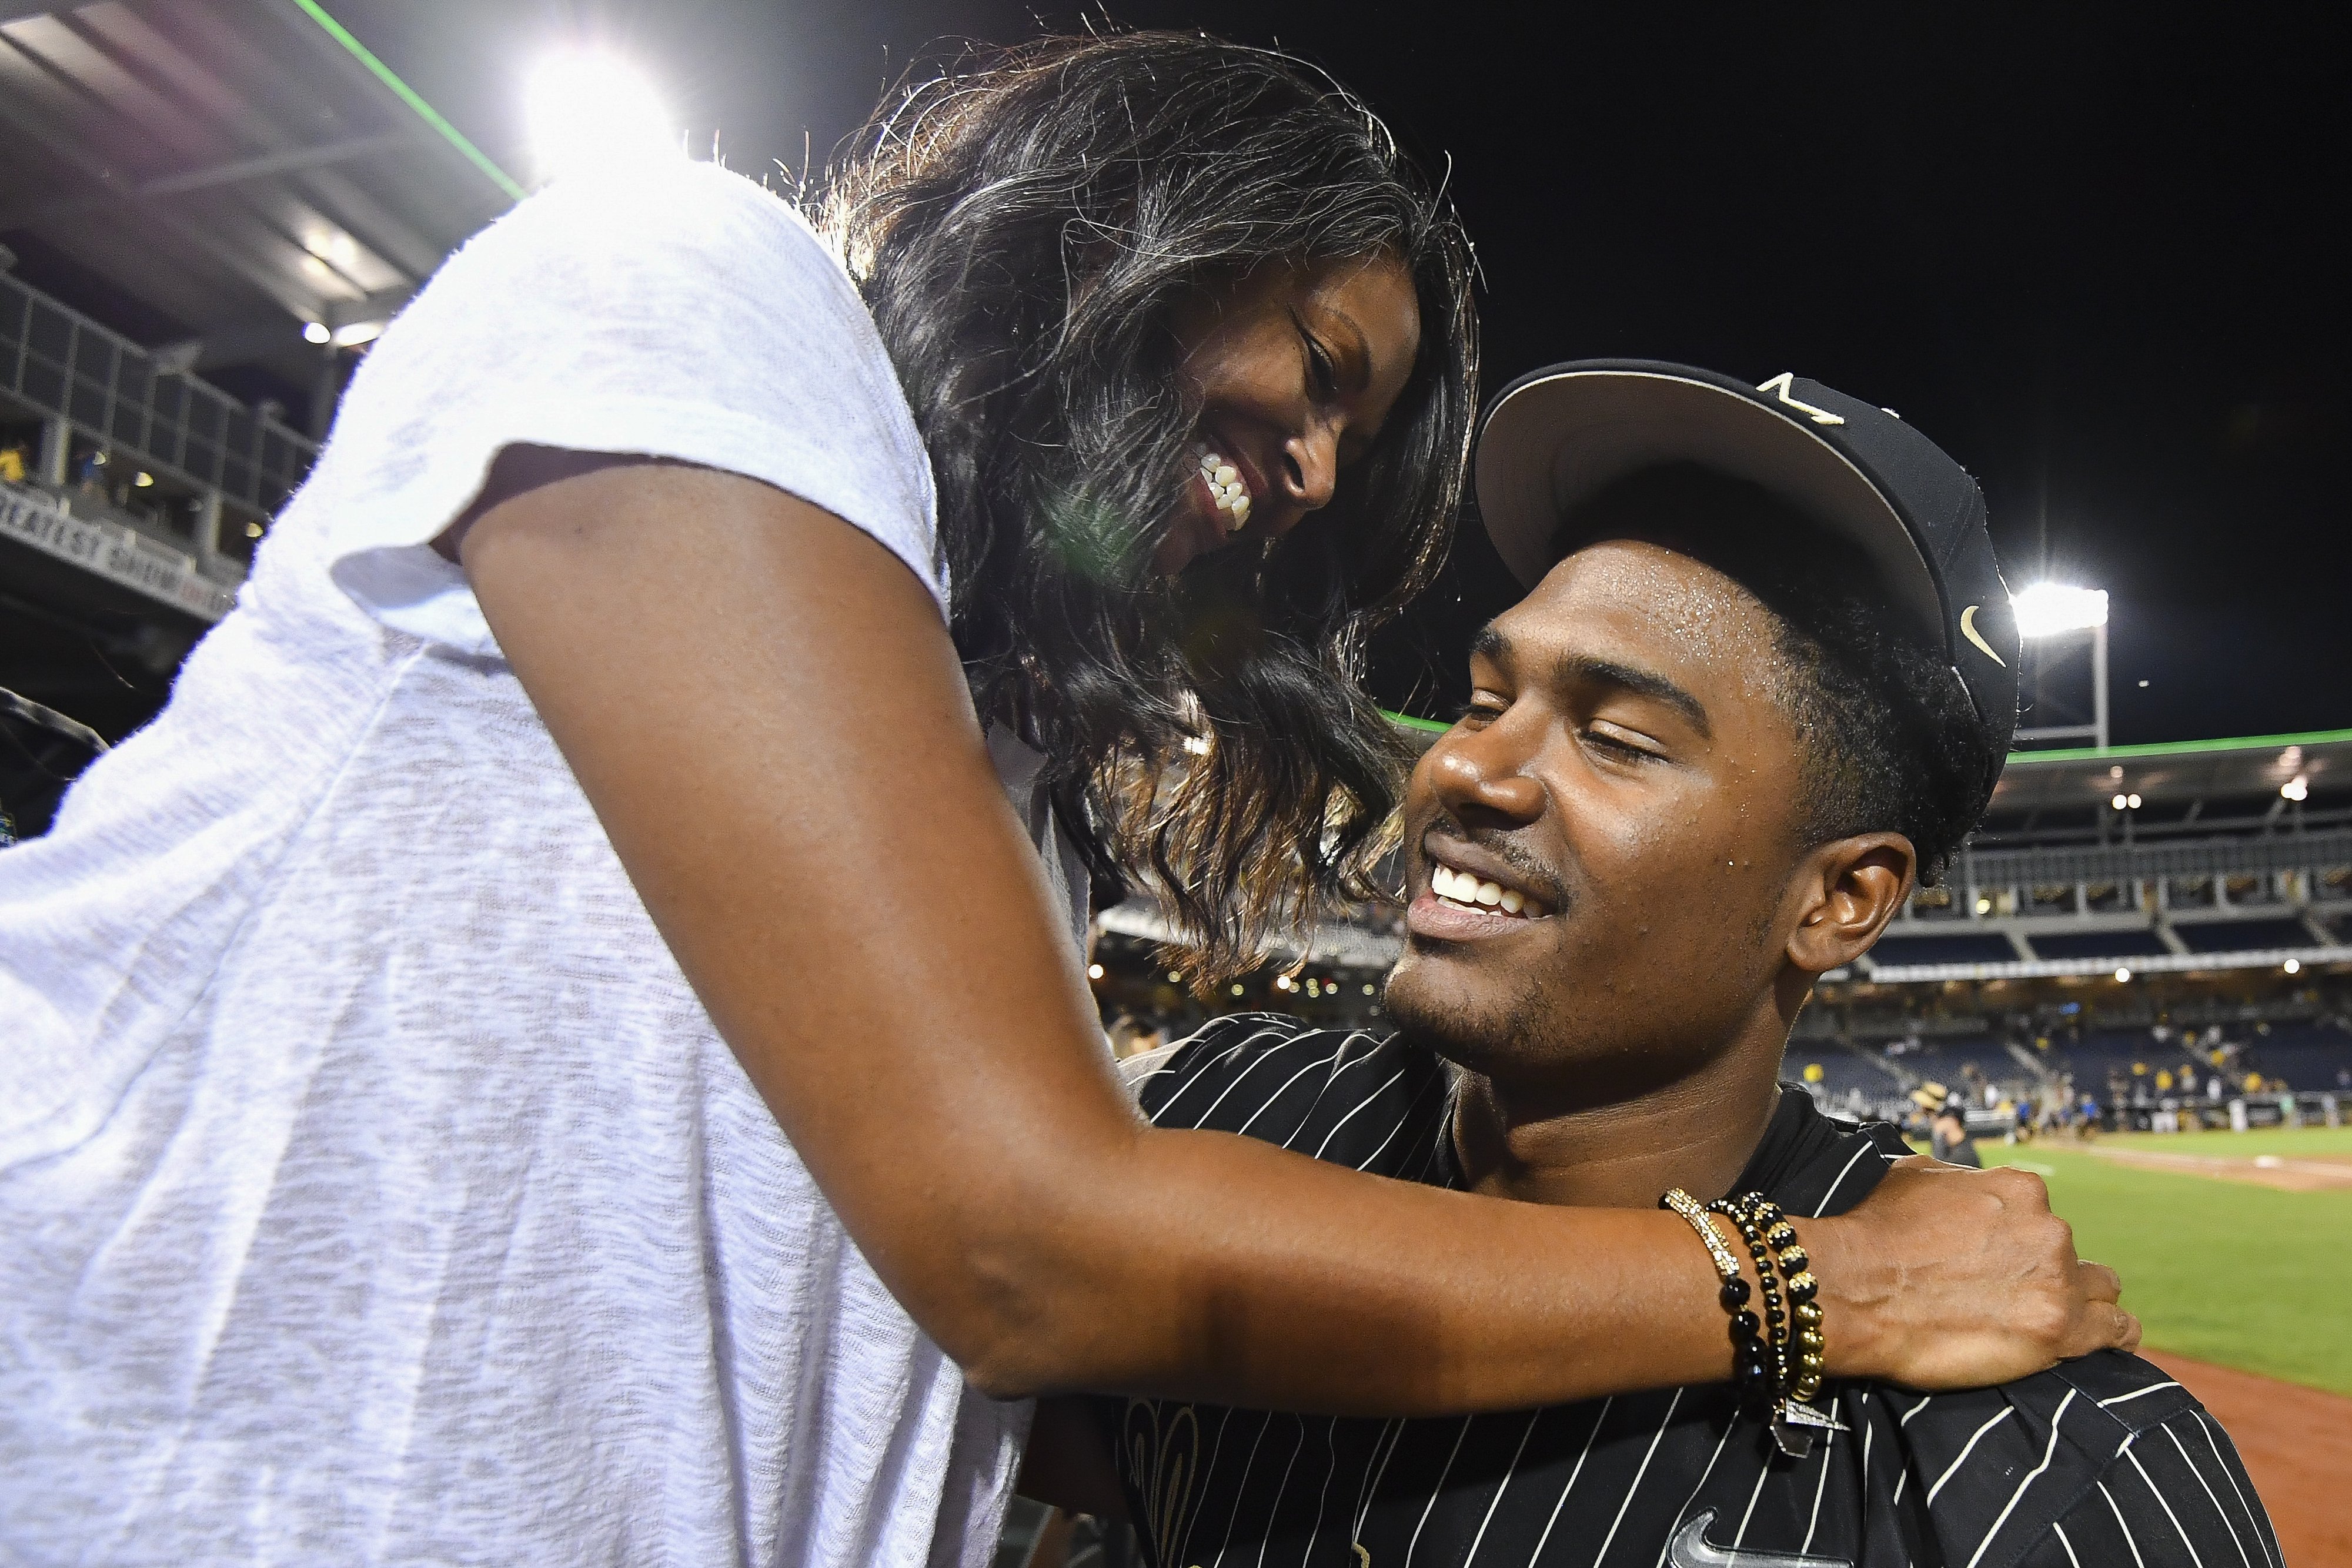 Kumar Rocker is hugged by his mother, Lalitha, after the Commodores defeated the Michigan Wolverines during the Division I Men's Baseball Championship on June 25, 2019 in Omaha, Nebraska. | Source: Getty Images